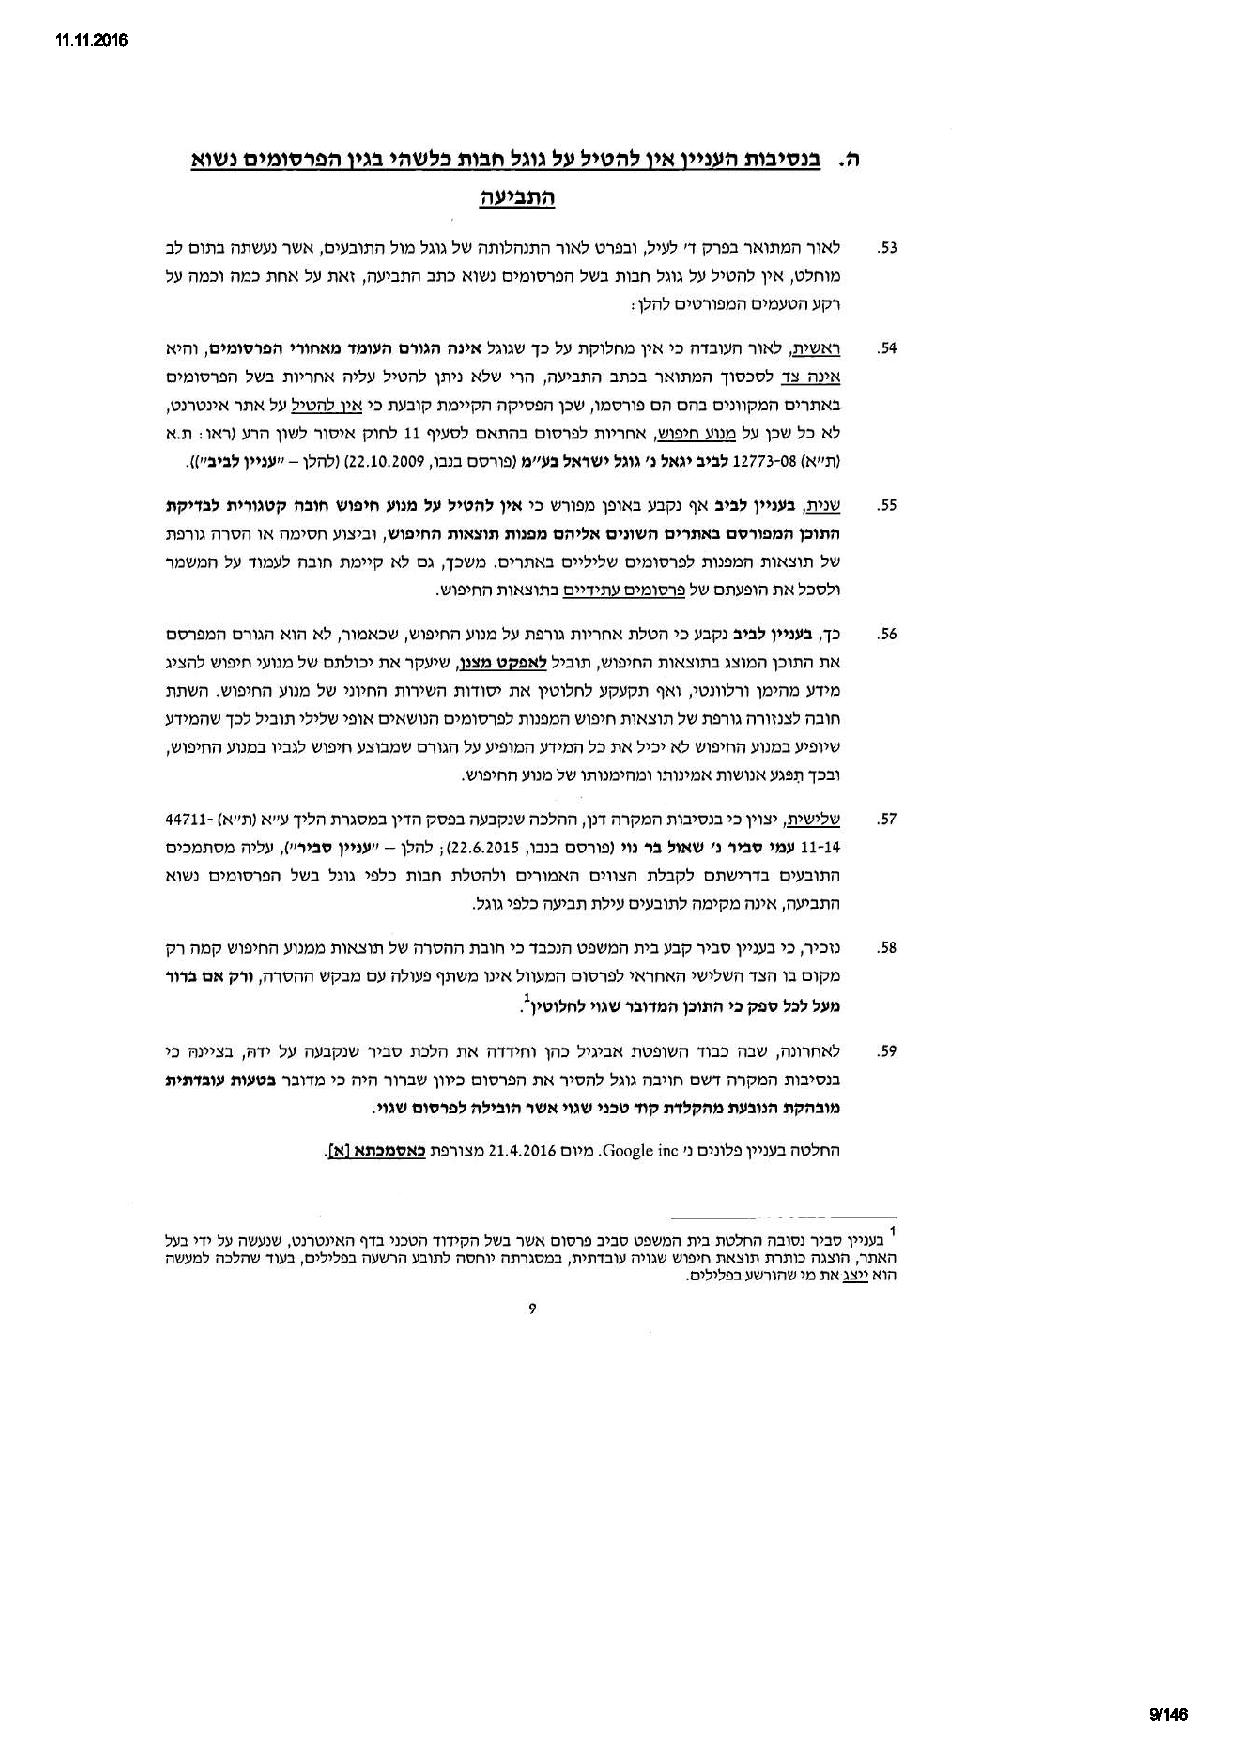 document-page-009